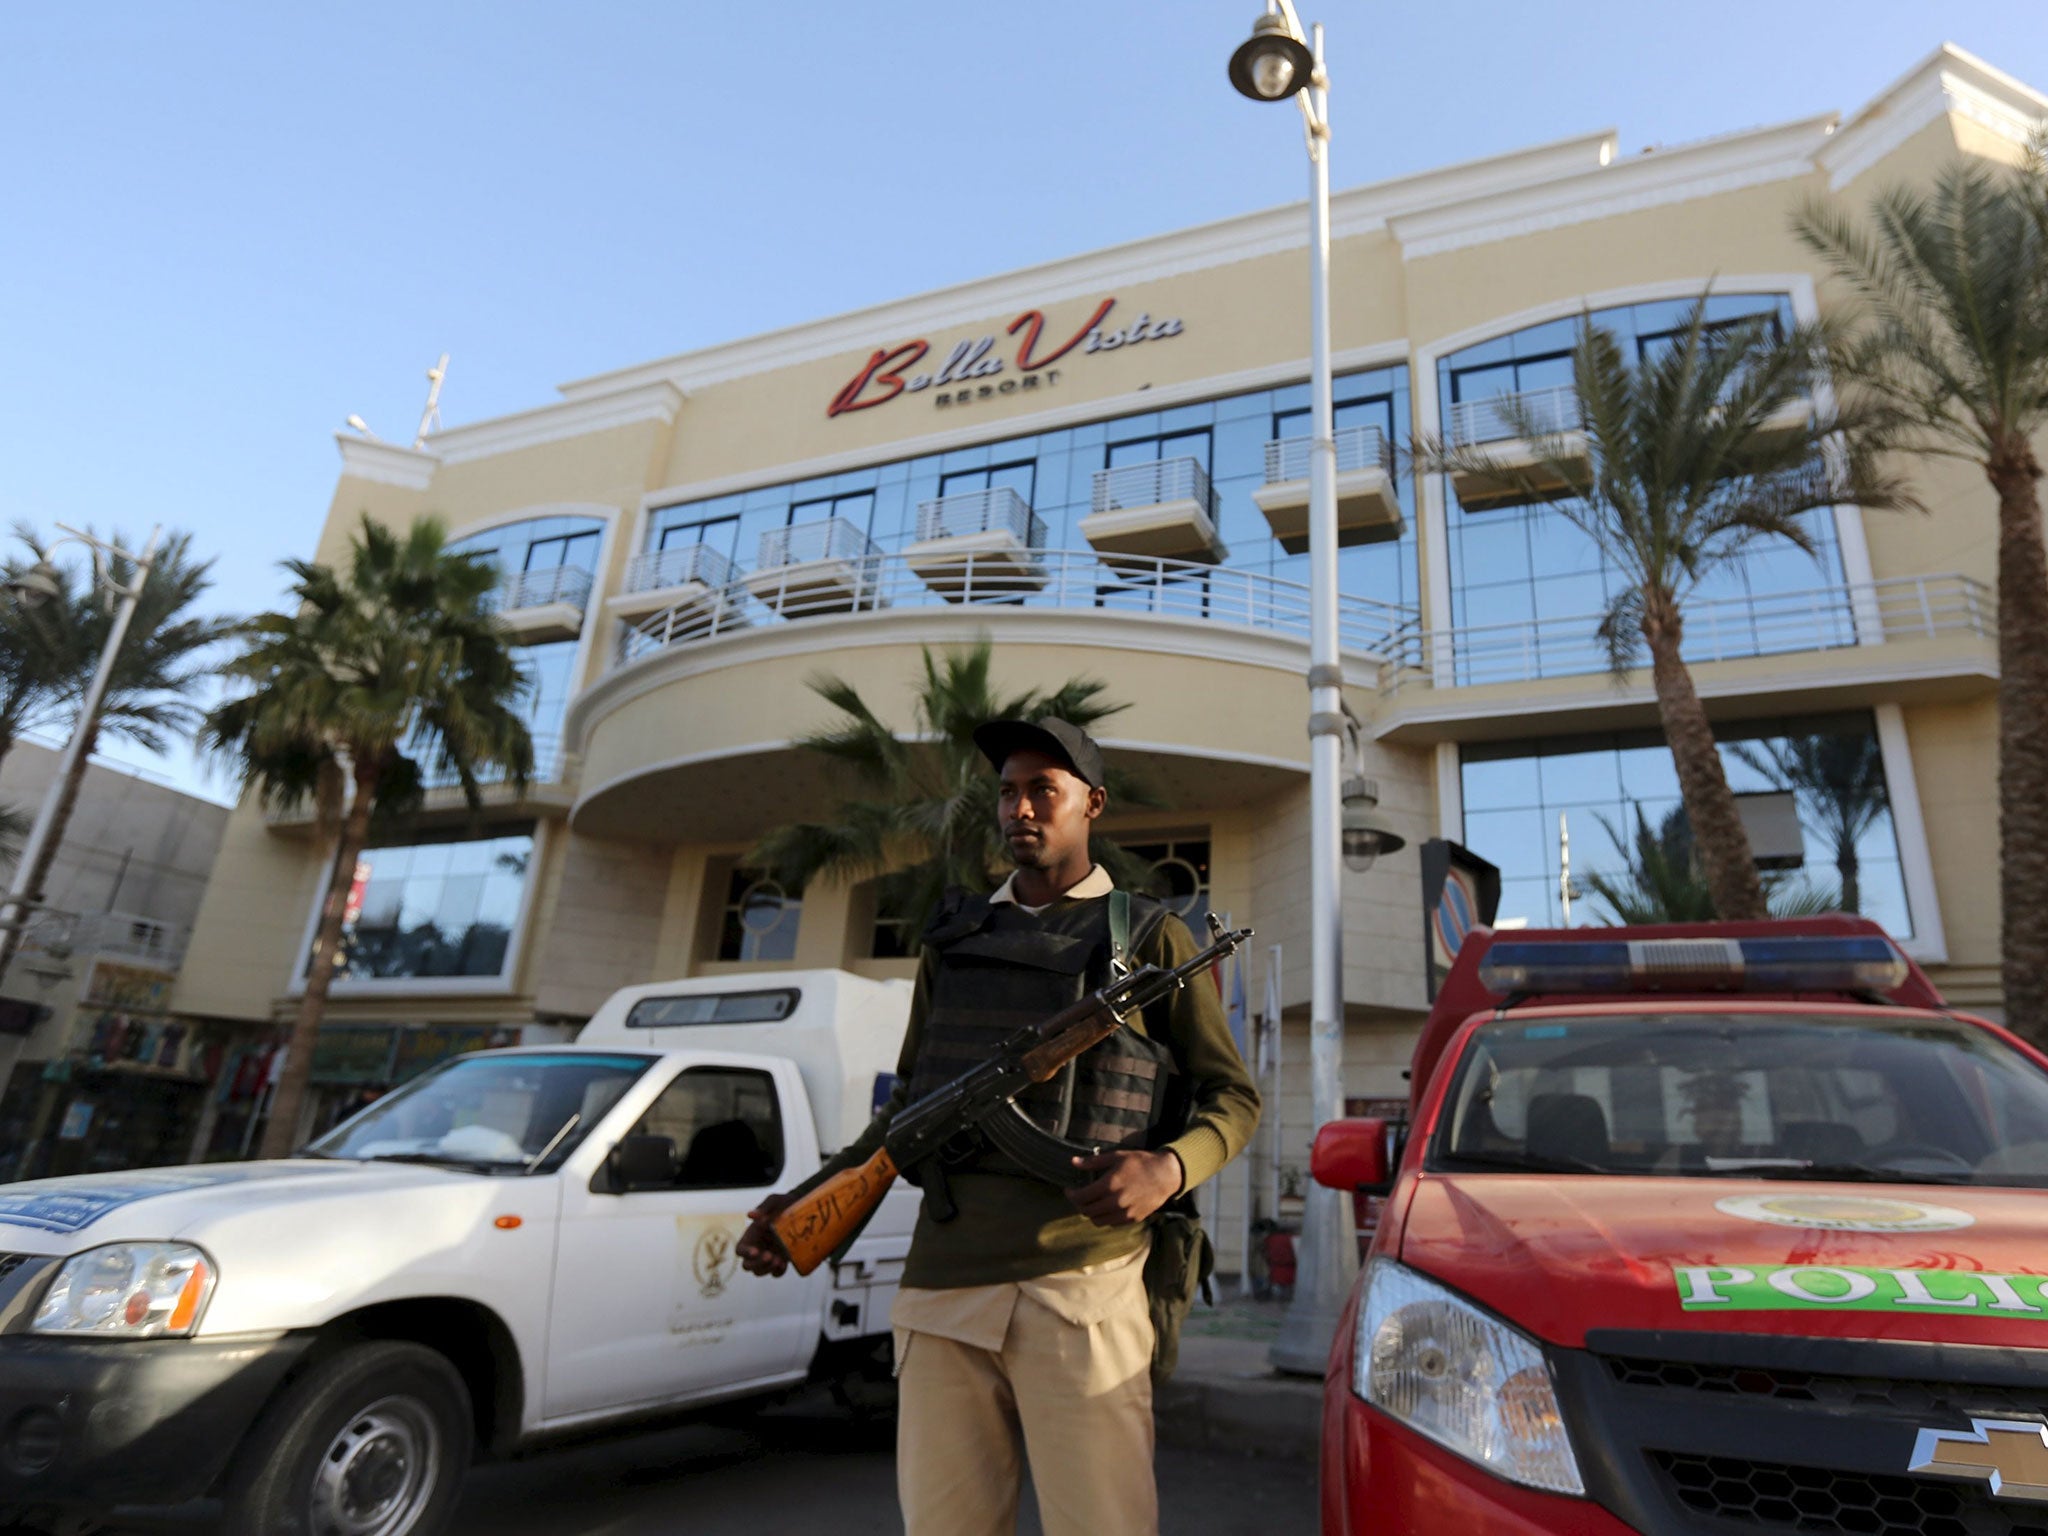 A member of the Egyptian security stands guard in front of the entrance to Bella Vista Hotel in the Red Sea resort of Hurghada, Egypt, January 9, 2016.